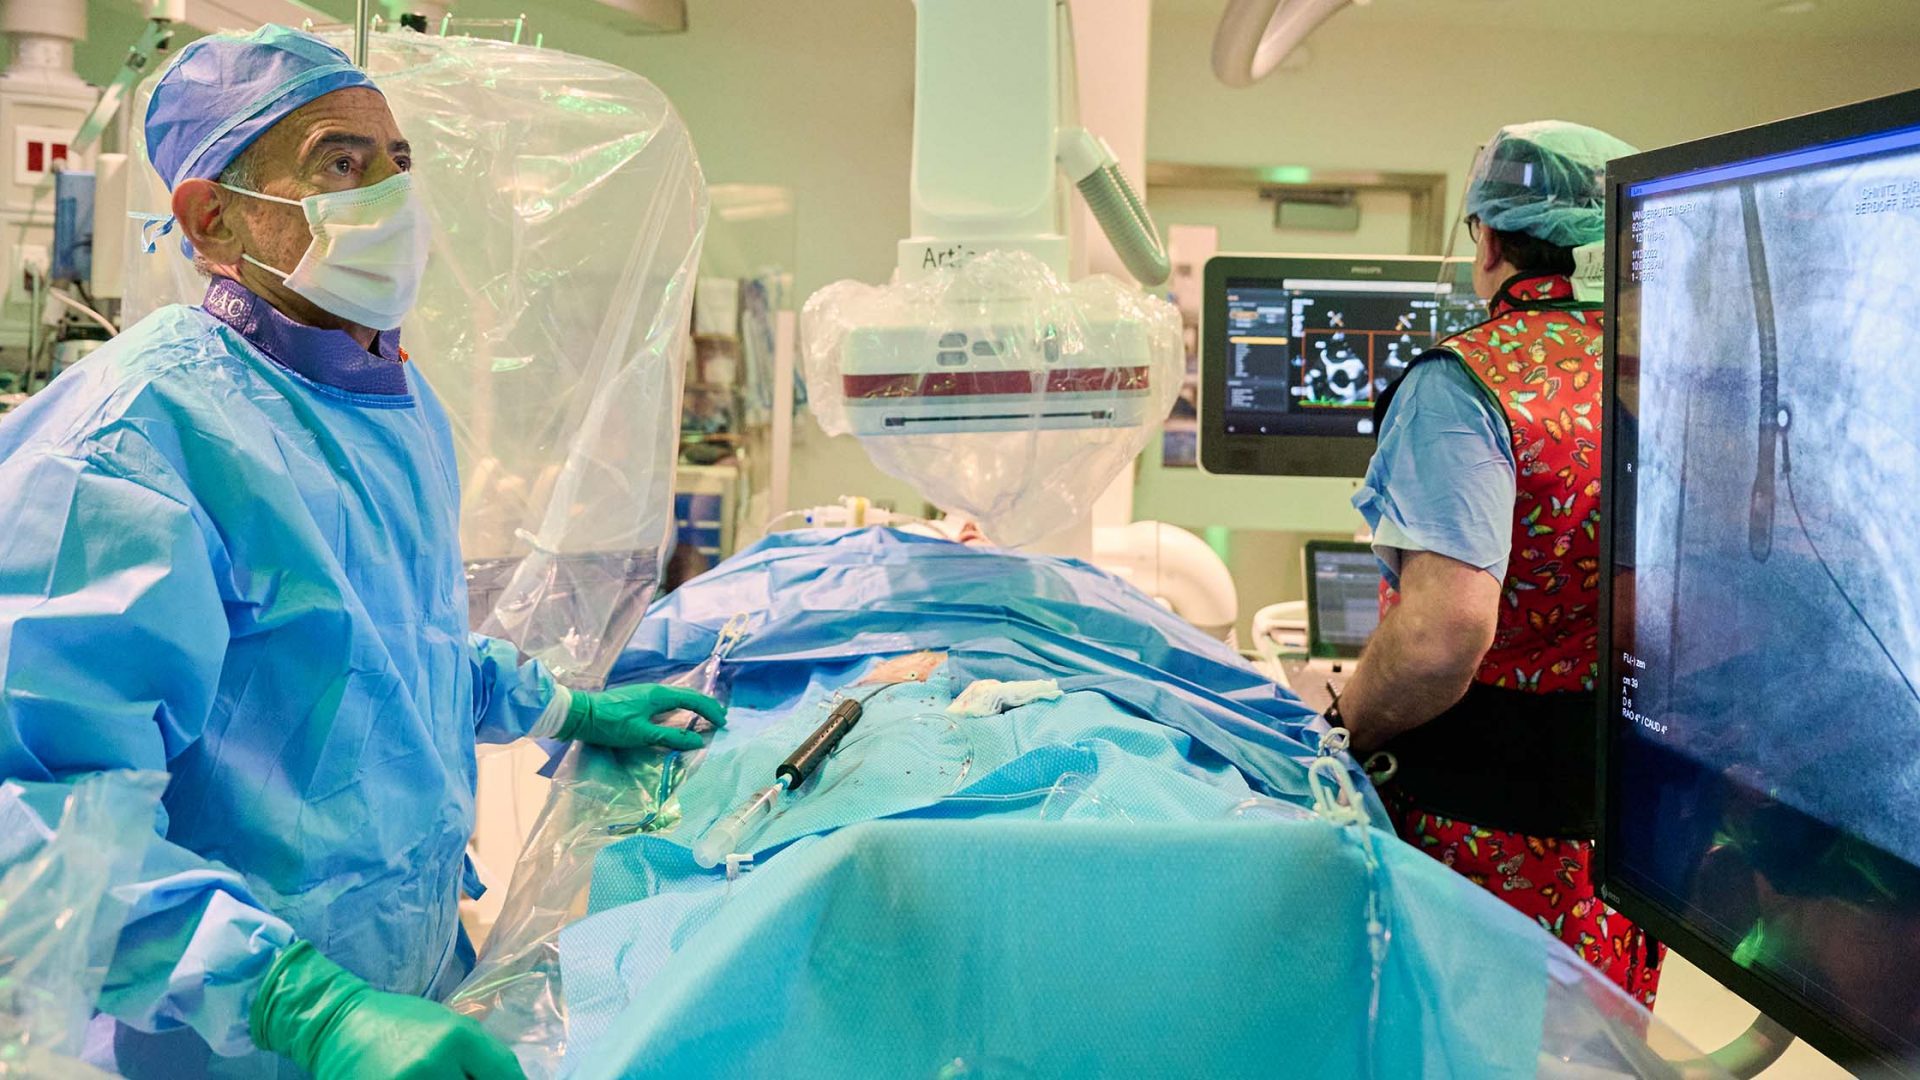 Dr. Larry Chinitz Viewing Screen During Catheter-Based Procedure in Operating Room